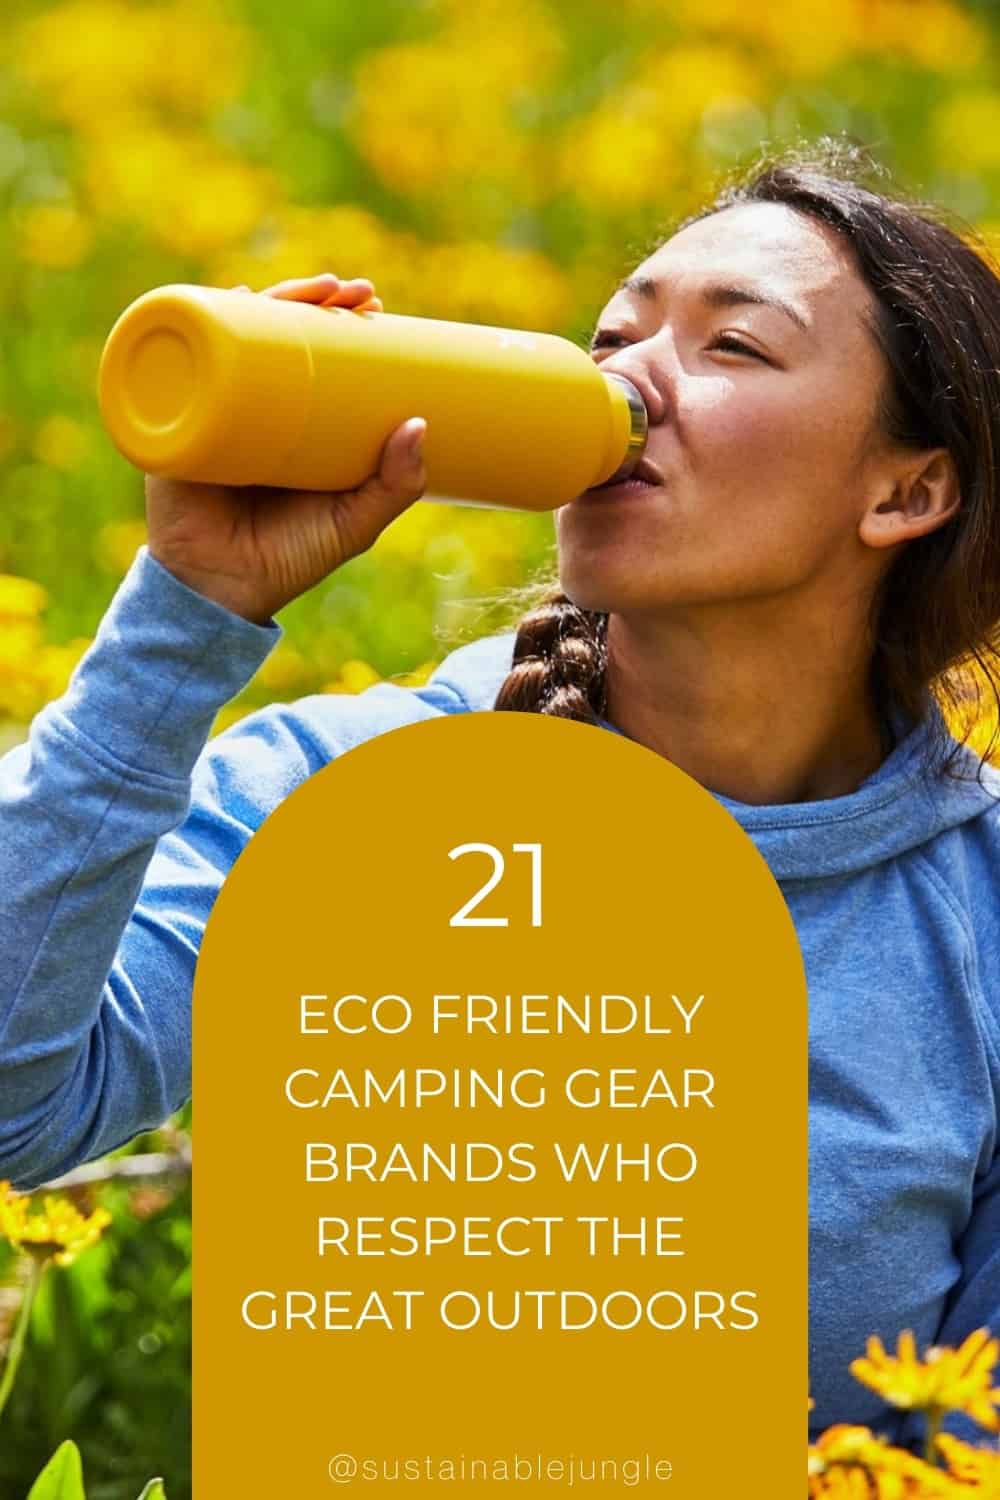 21 Eco Friendly Camping Gear Brands Who Respect The Great Outdoors #ecofriendlycampinggear #ecofriendlycampinggearbrands #usedecofriendlycampinggear #sustainablecampinggear #sustainablecampinggearbrands #bestsustainablecampinggear #environmentallyfriendlycampinggear #sustainablejungle Image by Hydro Flask